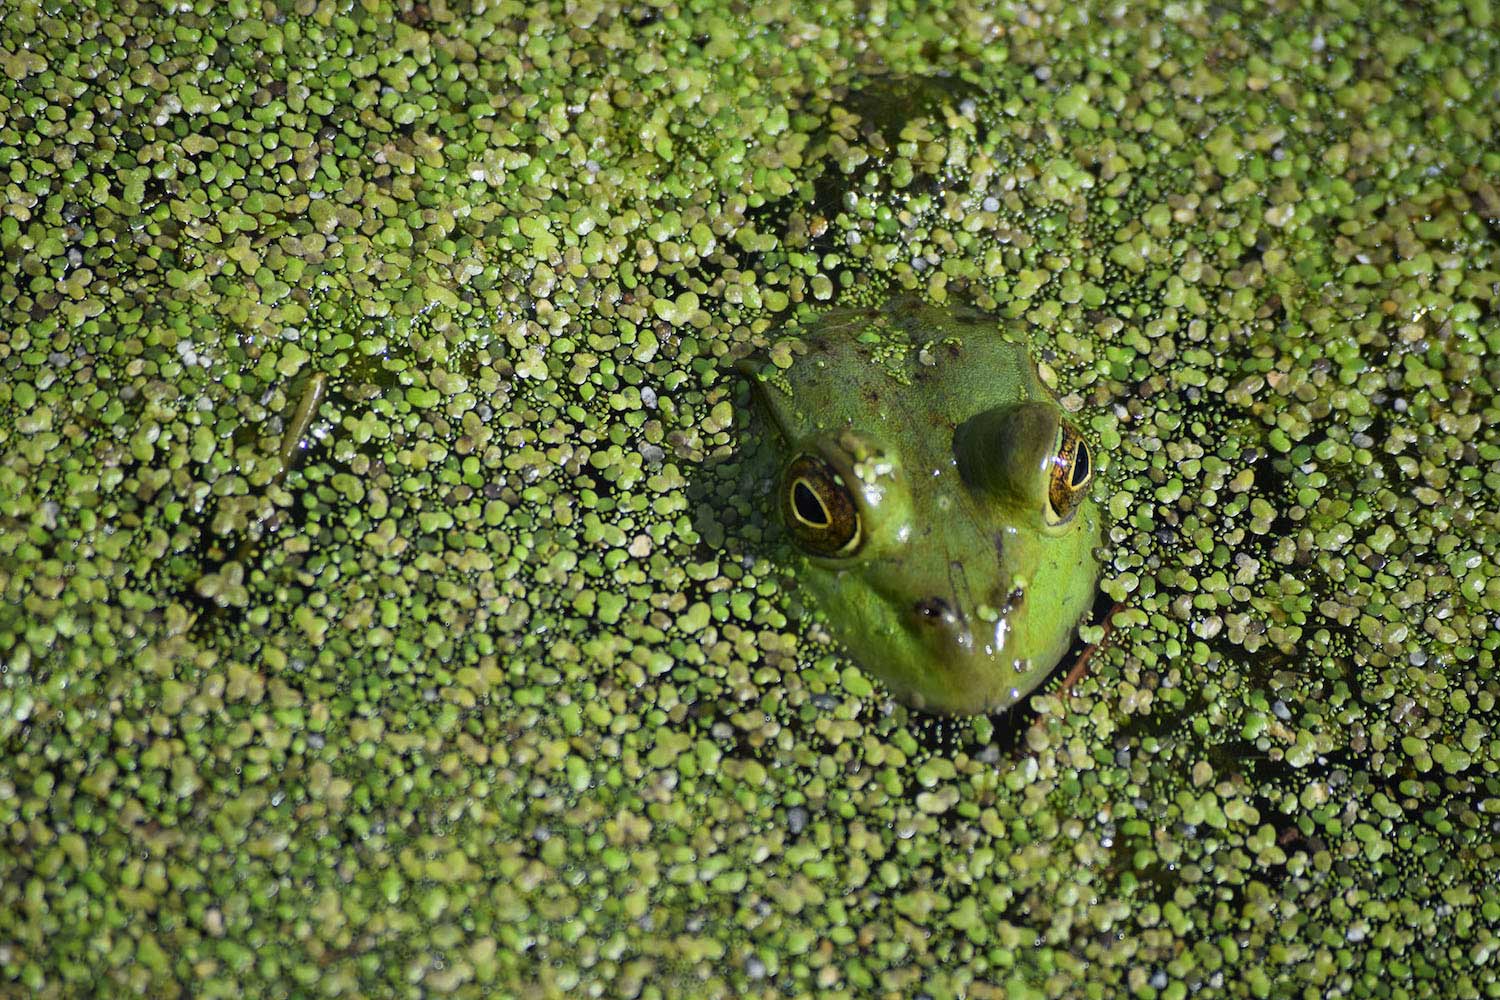 A frog with its head sticking out of the water surrounded by duckweed.